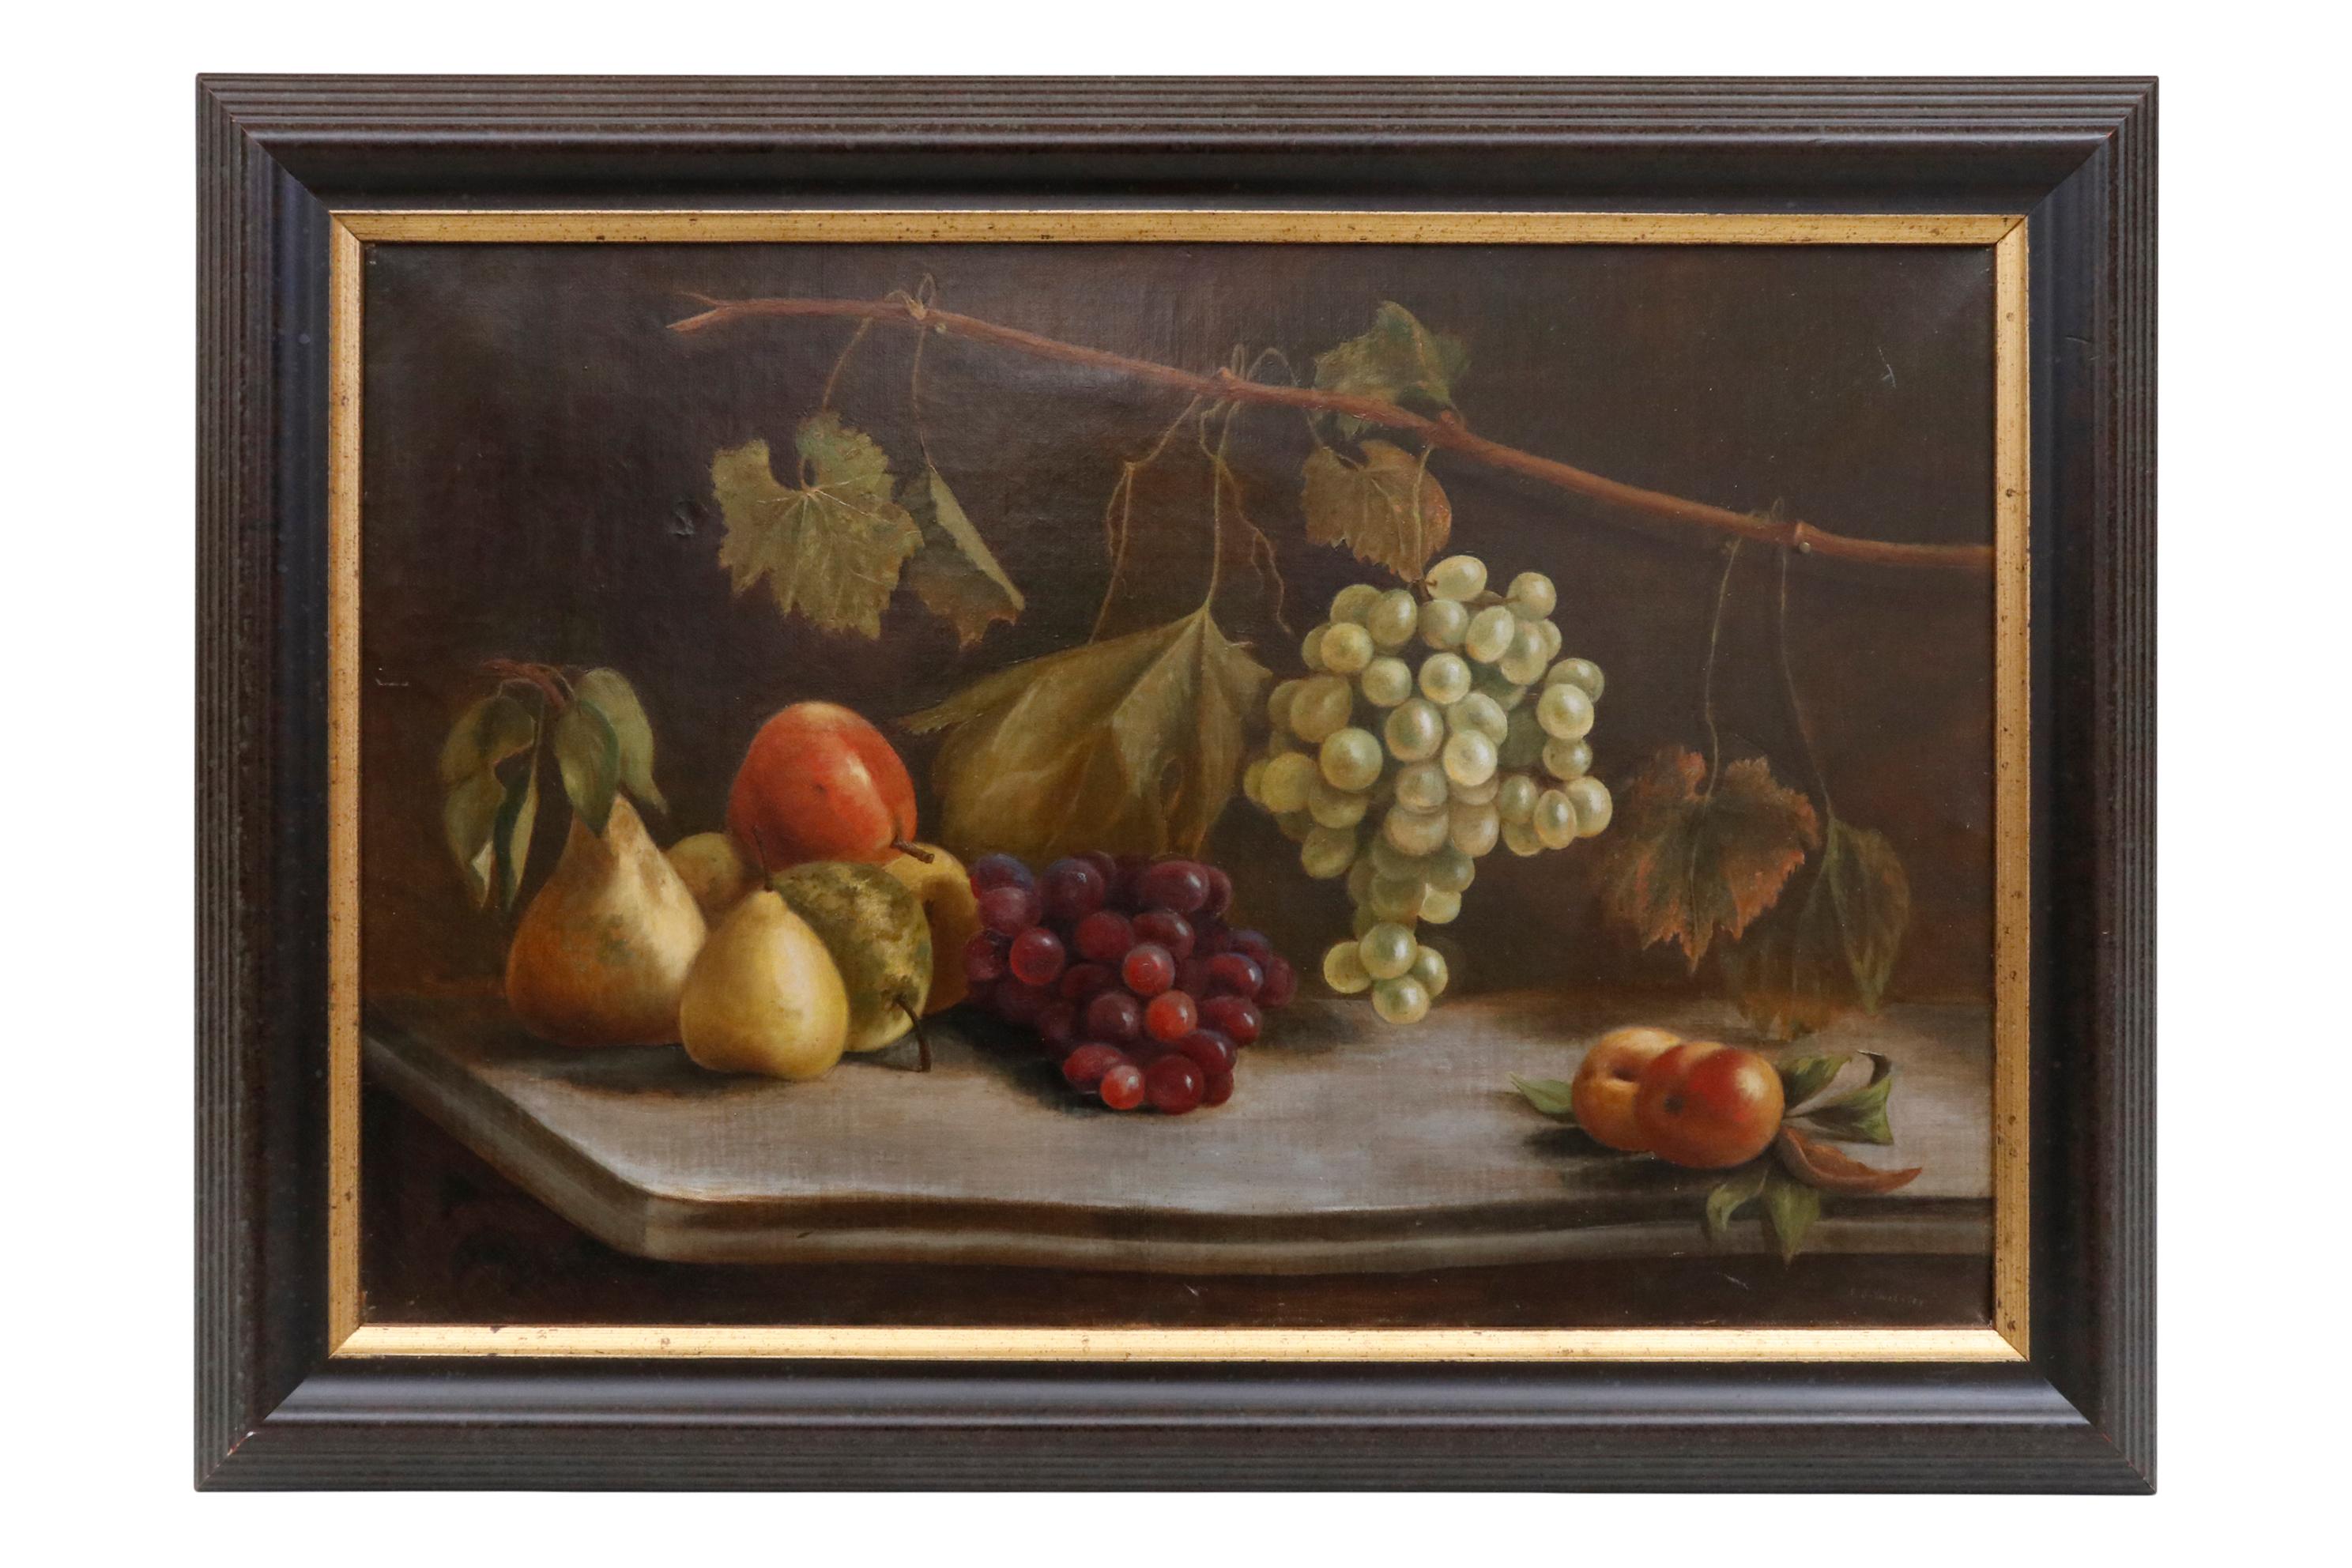 19th century still life on canvas composition of fruit on marble
Signed E.S. Webster
Canvas measures: 24 inches by 16 inches
Frame measures: 28 x 21.